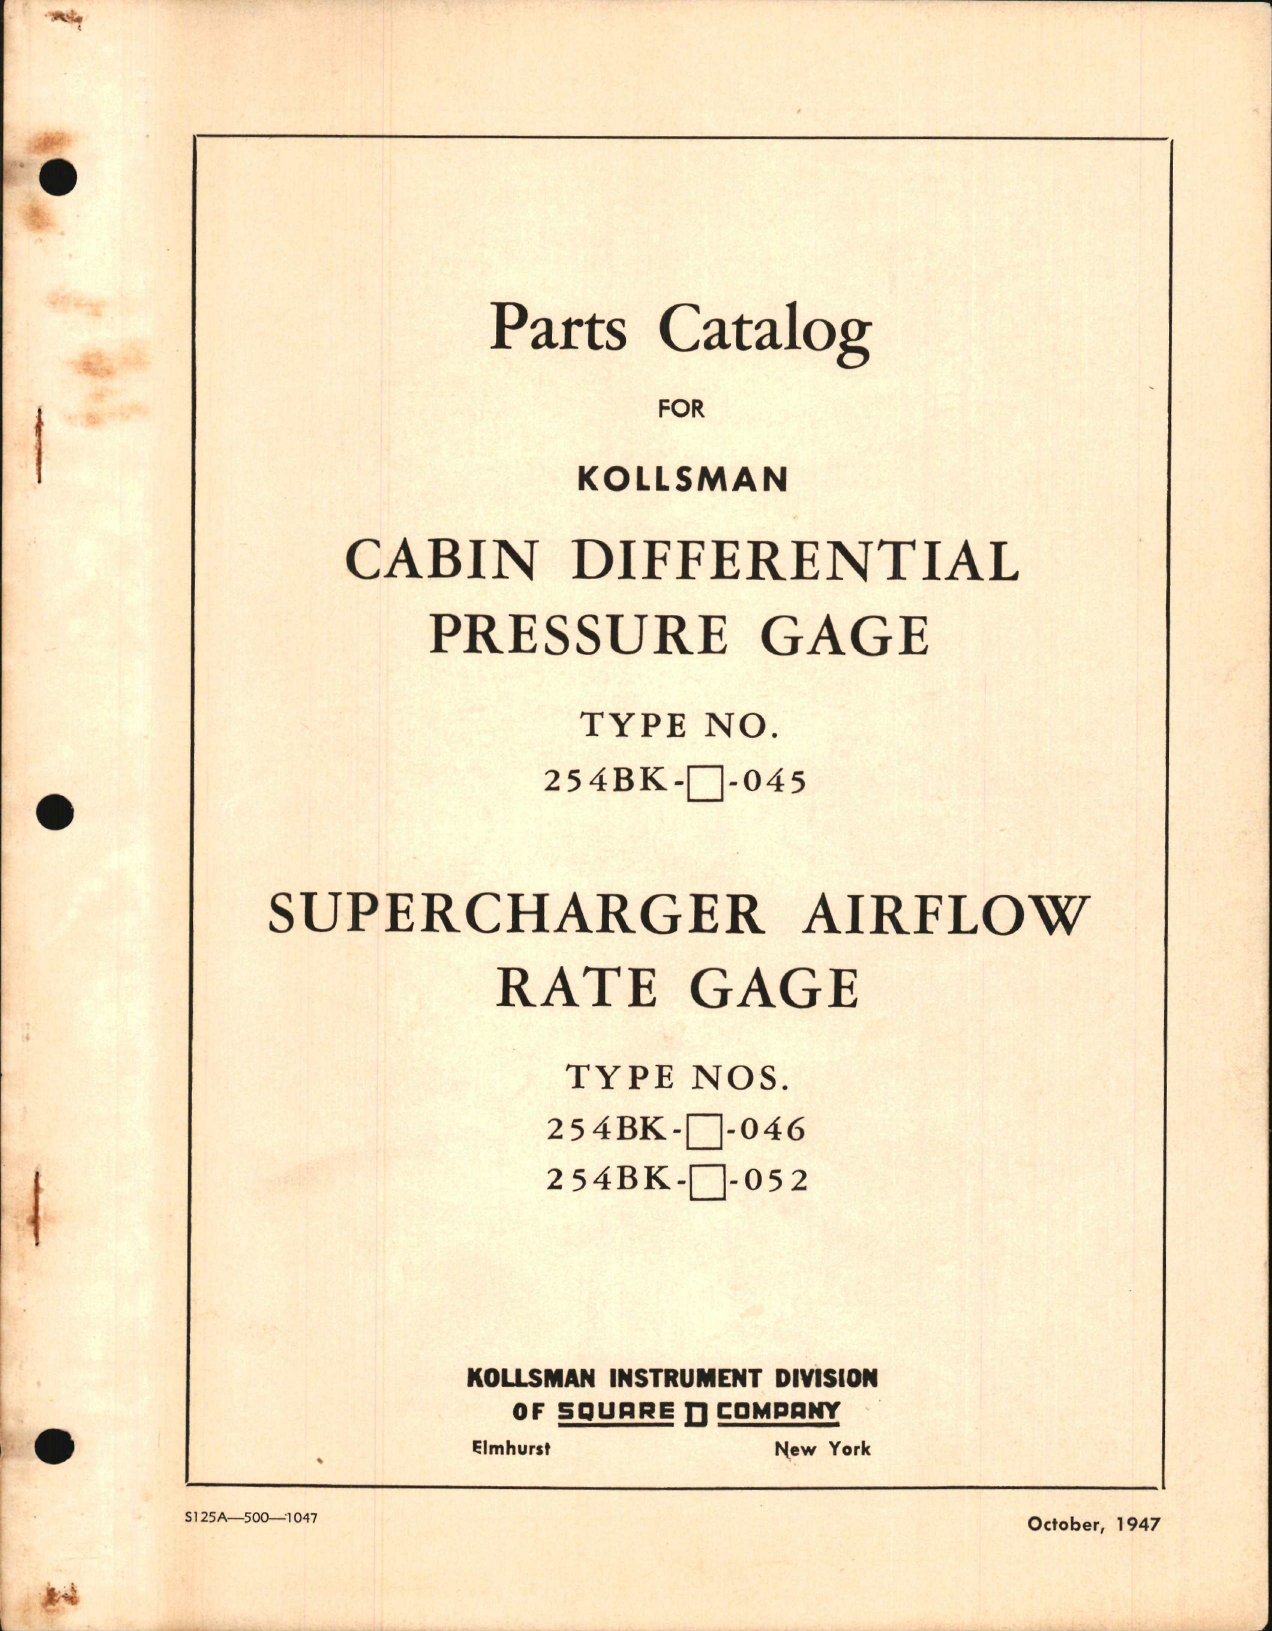 Sample page 1 from AirCorps Library document: Parts Catalog for Kollsman Cabin Differential Pressure Gage and Supercharger Airflow Rate Gage